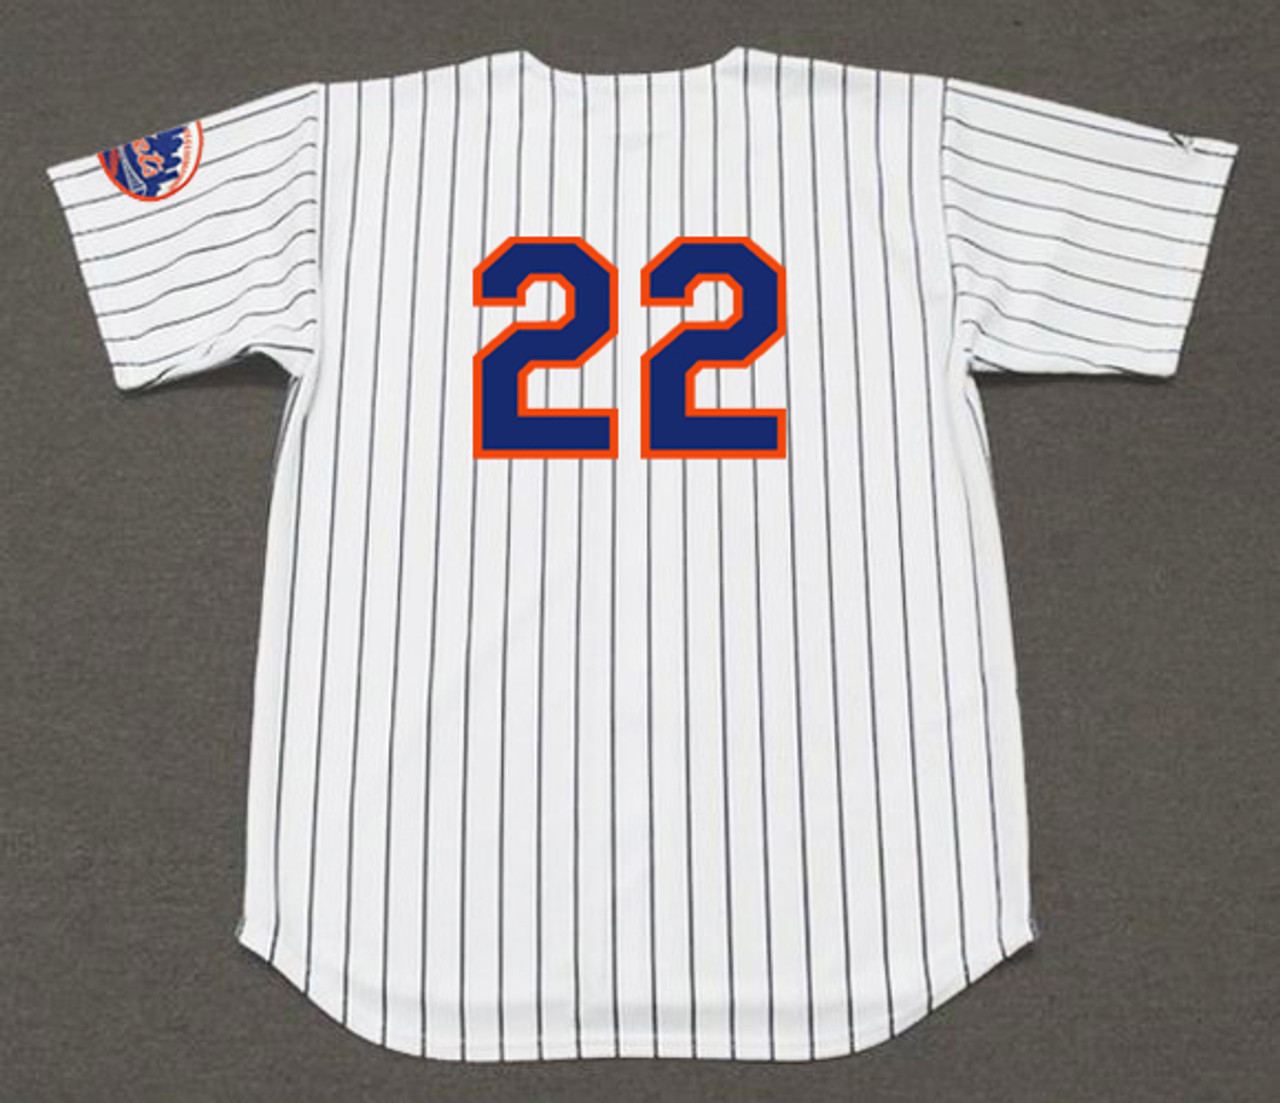 Don Clendenon Jersey - 1969 New York Mets Home MLB Throwback Jersey